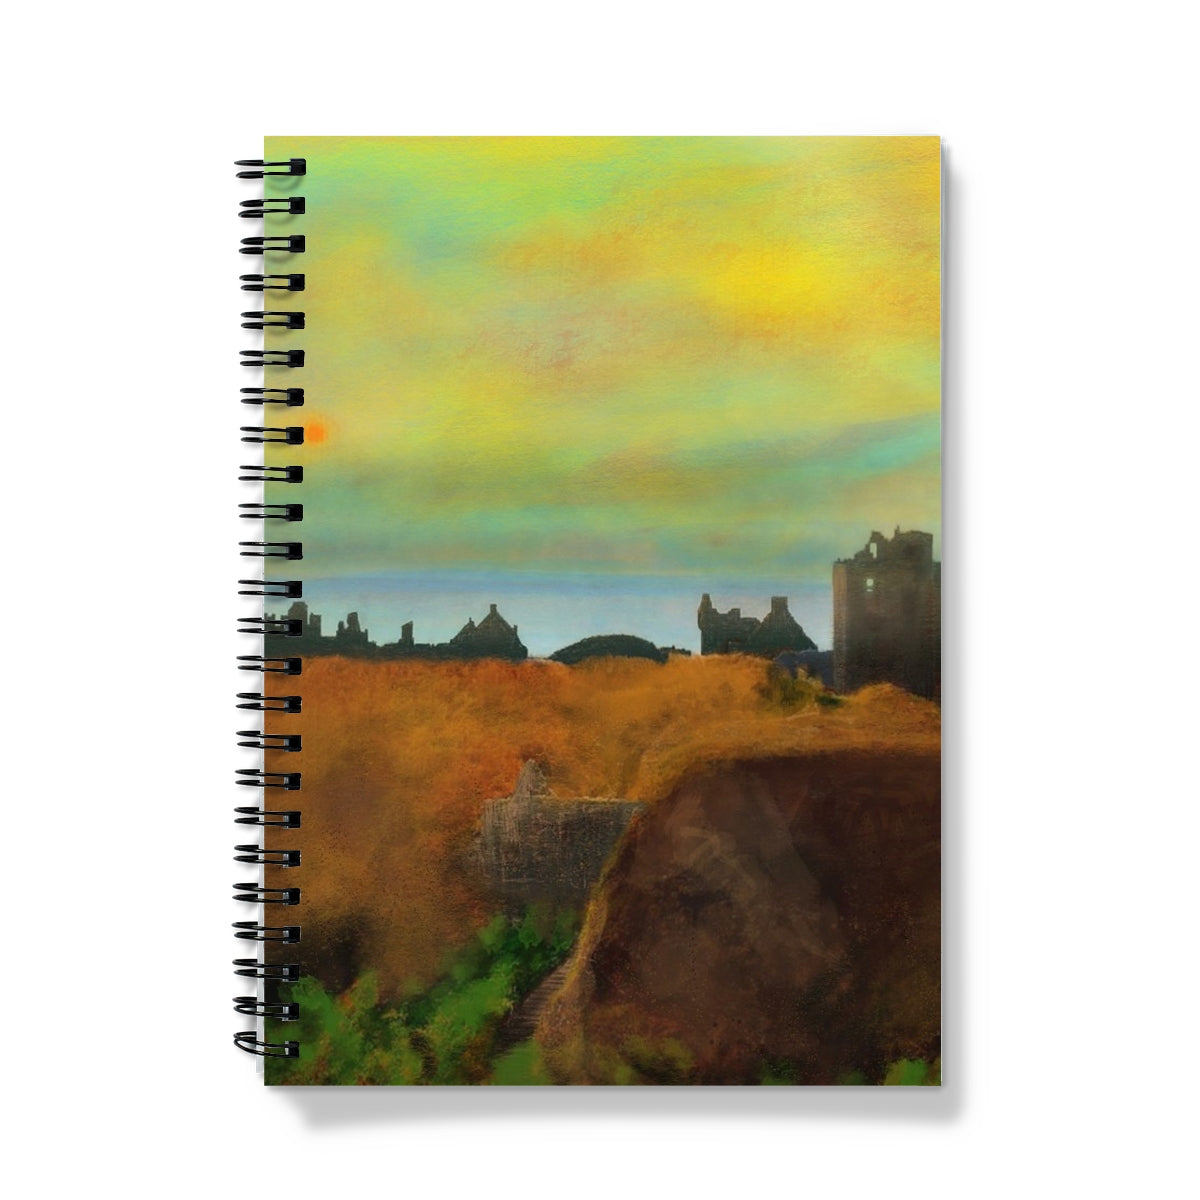 Dunnottar Castle Art Gifts Notebook-Journals & Notebooks-Historic & Iconic Scotland Art Gallery-A4-Graph-Paintings, Prints, Homeware, Art Gifts From Scotland By Scottish Artist Kevin Hunter